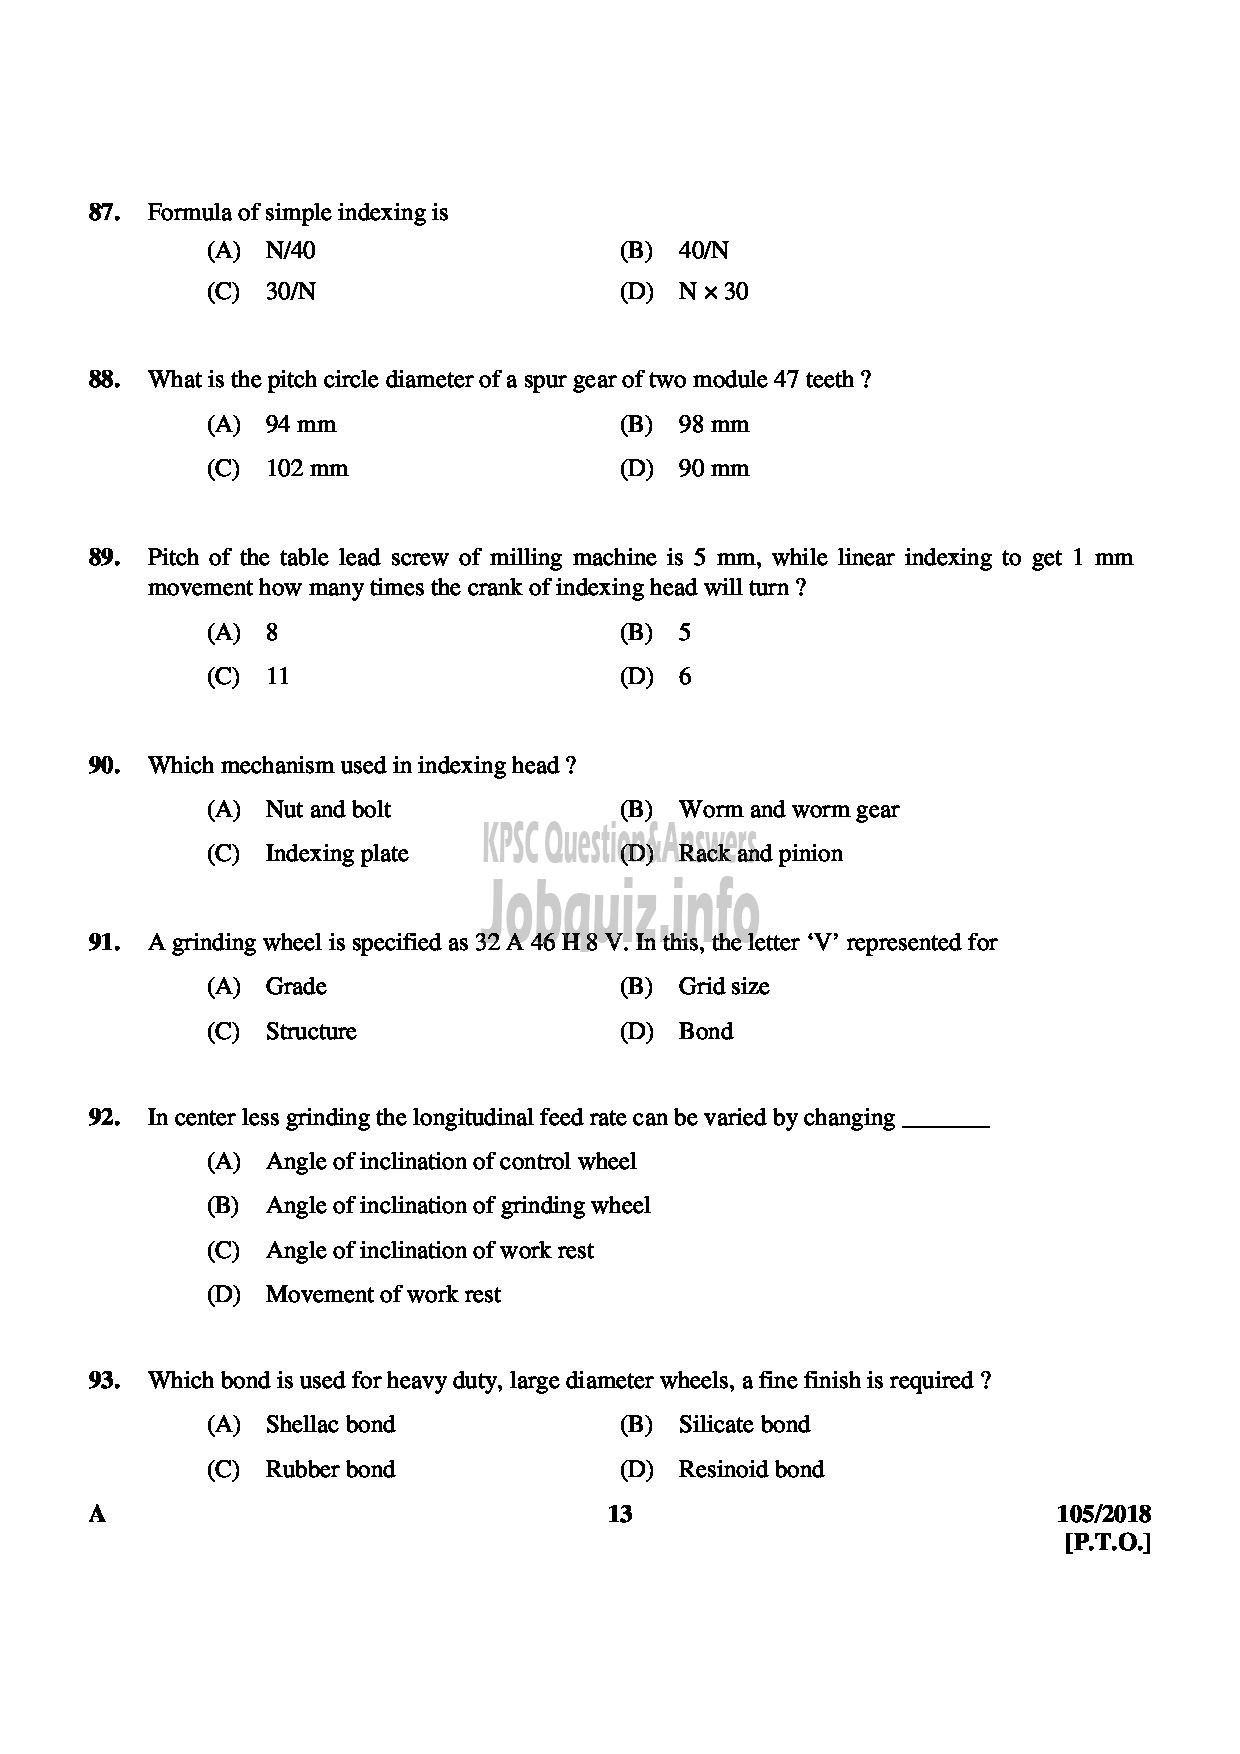 Kerala PSC Question Paper - JUNIOR INSTRUCTOR MACHINIST INDUSTRIAL TRAINING English -13